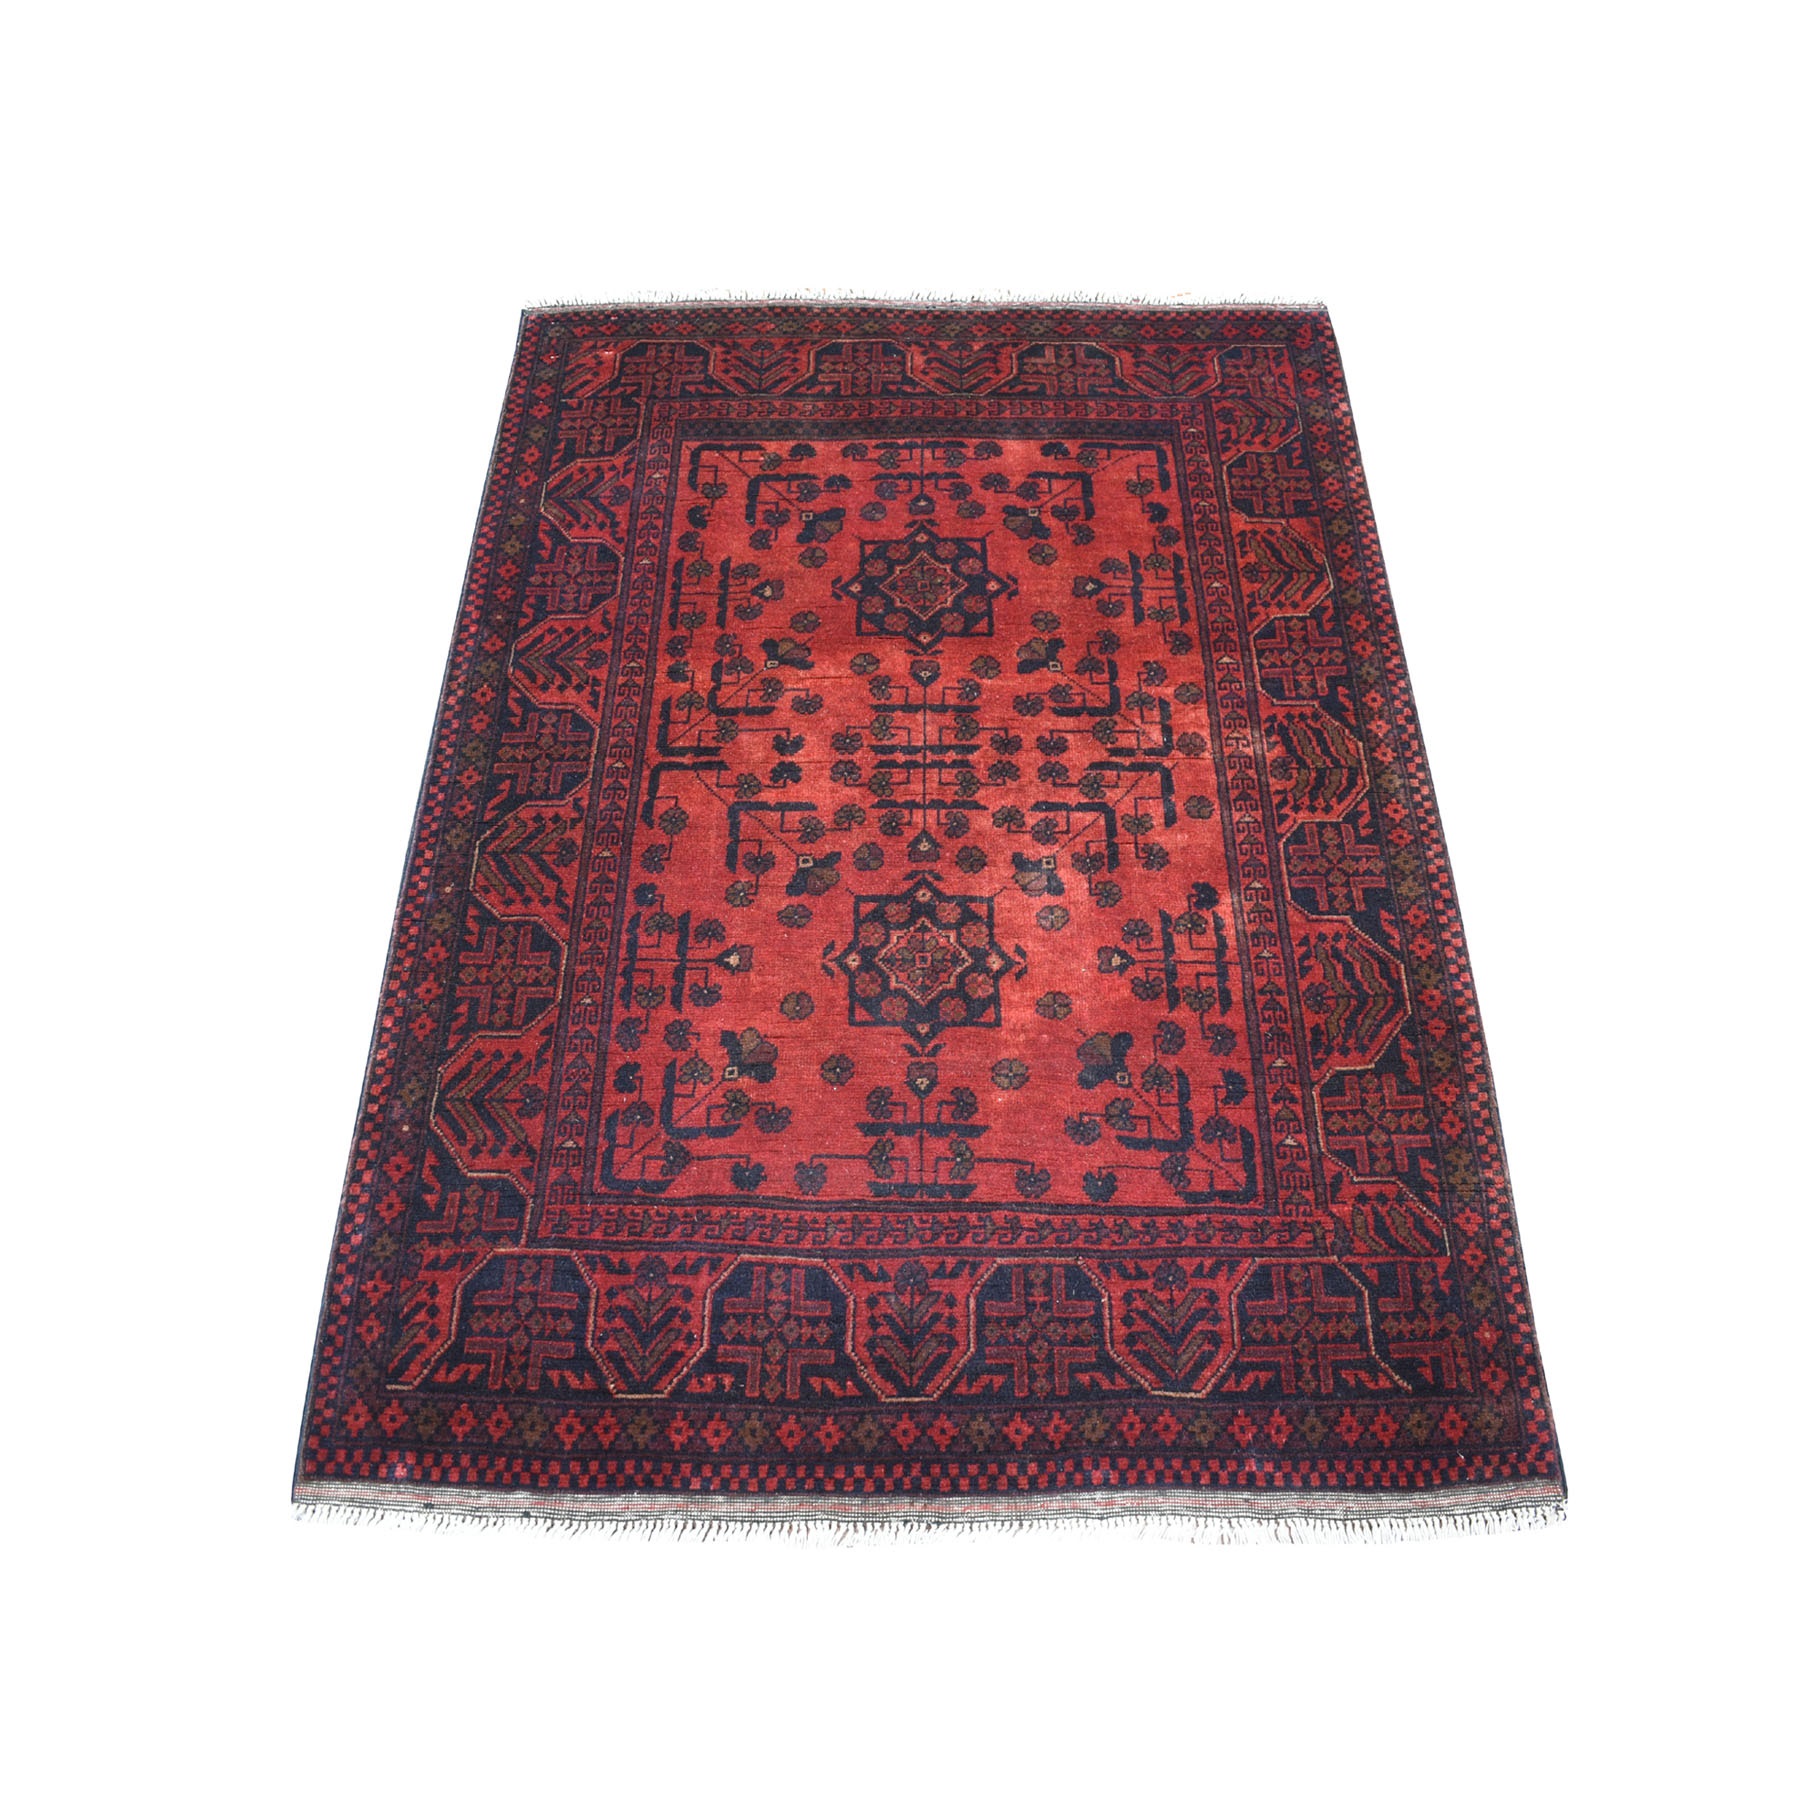 3'6"X4'7" Deep And Saturated Red Geometric Design Afghan Andkhoy Pure Wool Hand-Knotted Oriental Rug moaec889